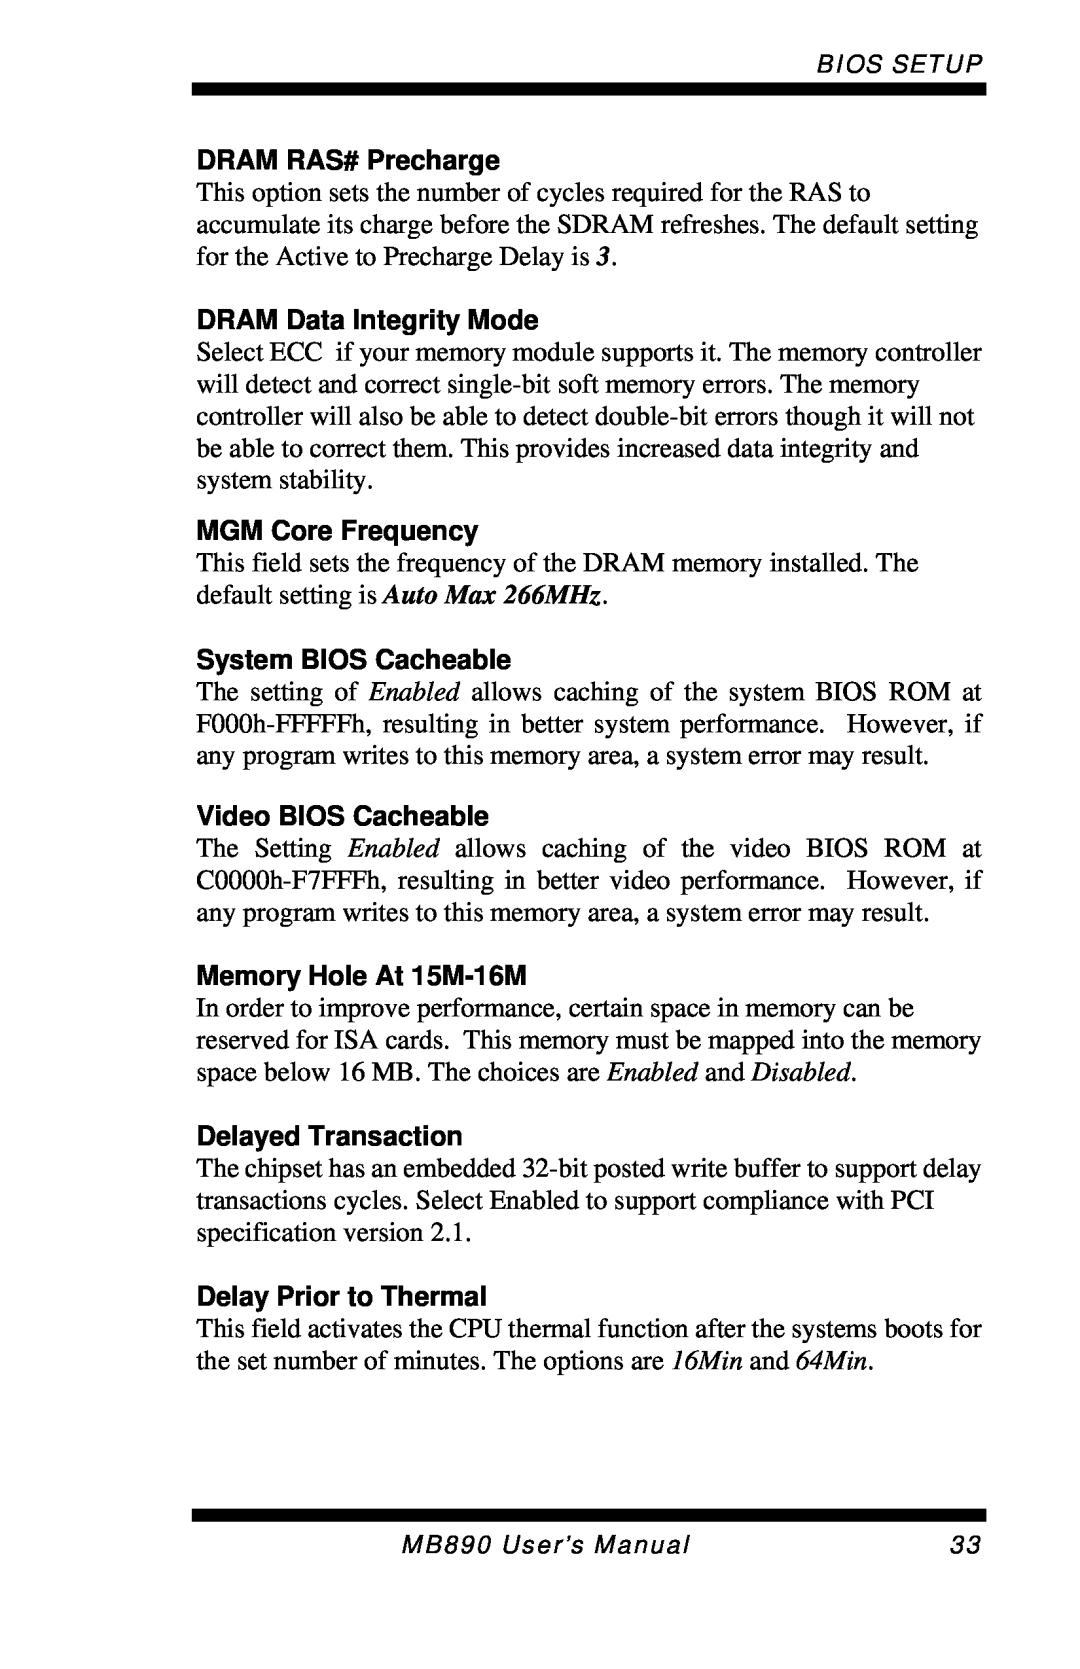 Intel MB890 DRAM RAS# Precharge, DRAM Data Integrity Mode, MGM Core Frequency, System BIOS Cacheable, Video BIOS Cacheable 